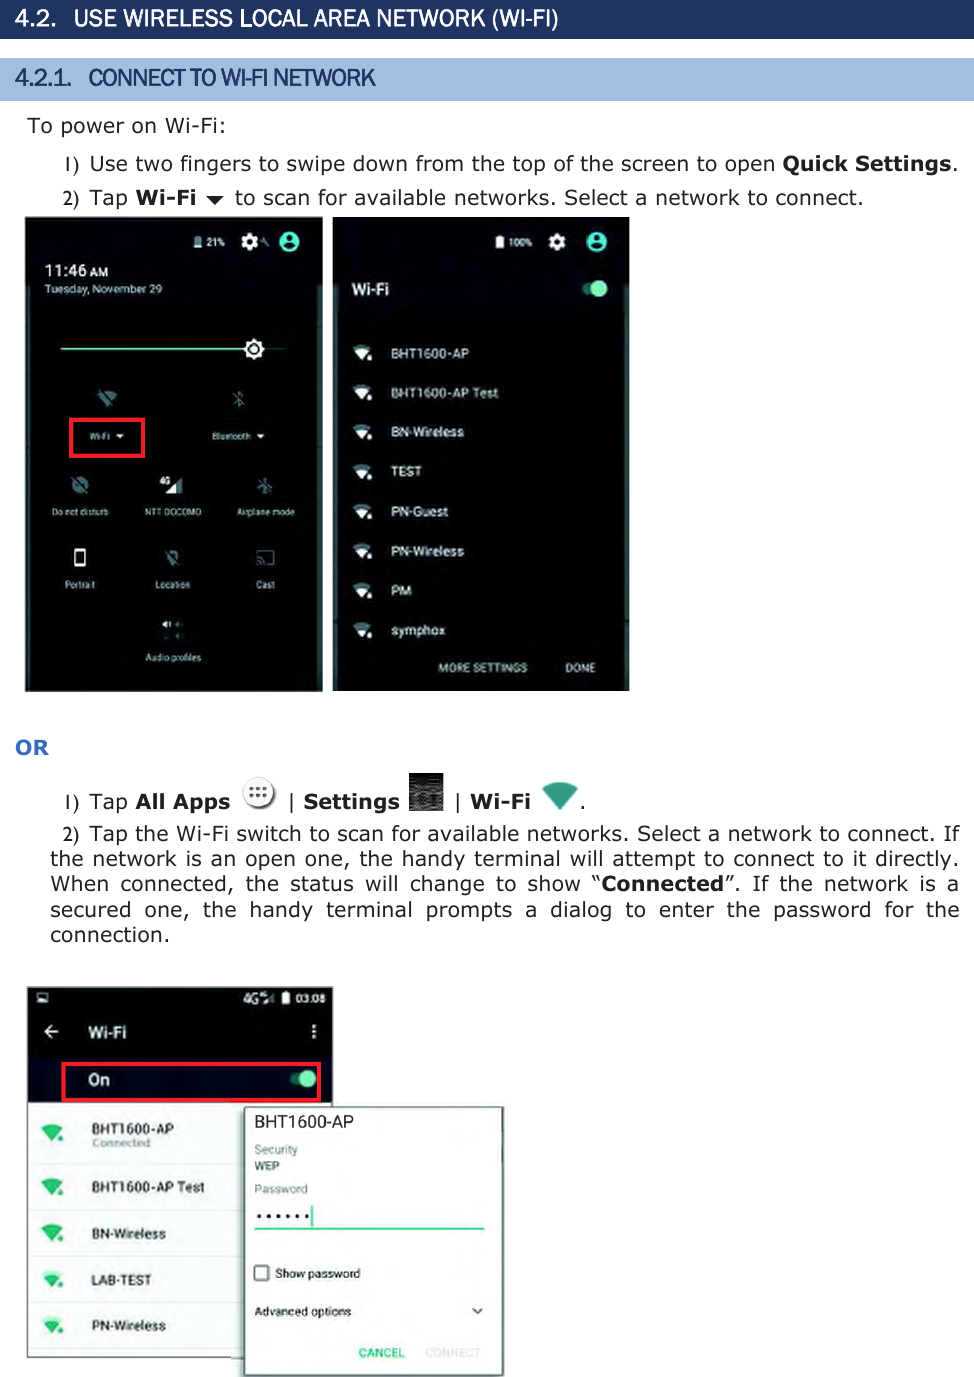 4.2. USE WIRELESS LOCAL AREA NETWORK (WI-FI) 4.2.1. CONNECT TO WI-FI NETWORK To power on Wi-Fi: 1) Use two fingers to swipe down from the top of the screen to open Quick Settings.2) Tap Wi-Fi bto scan for available networks. Select a network to connect.      OR1) Tap All Apps    | Settings    | Wi-Fi  . 2) Tap the Wi-Fi switch to scan for available networks. Select a network to connect. If the network is an open one, the handy terminal will attempt to connect to it directly. When  connected,  the  status  will  change  to  show  “Connected”.  If  the  network  is  a secured  one,  the  handy  terminal  prompts  a  dialog  to  enter  the  password  for  the connection.   